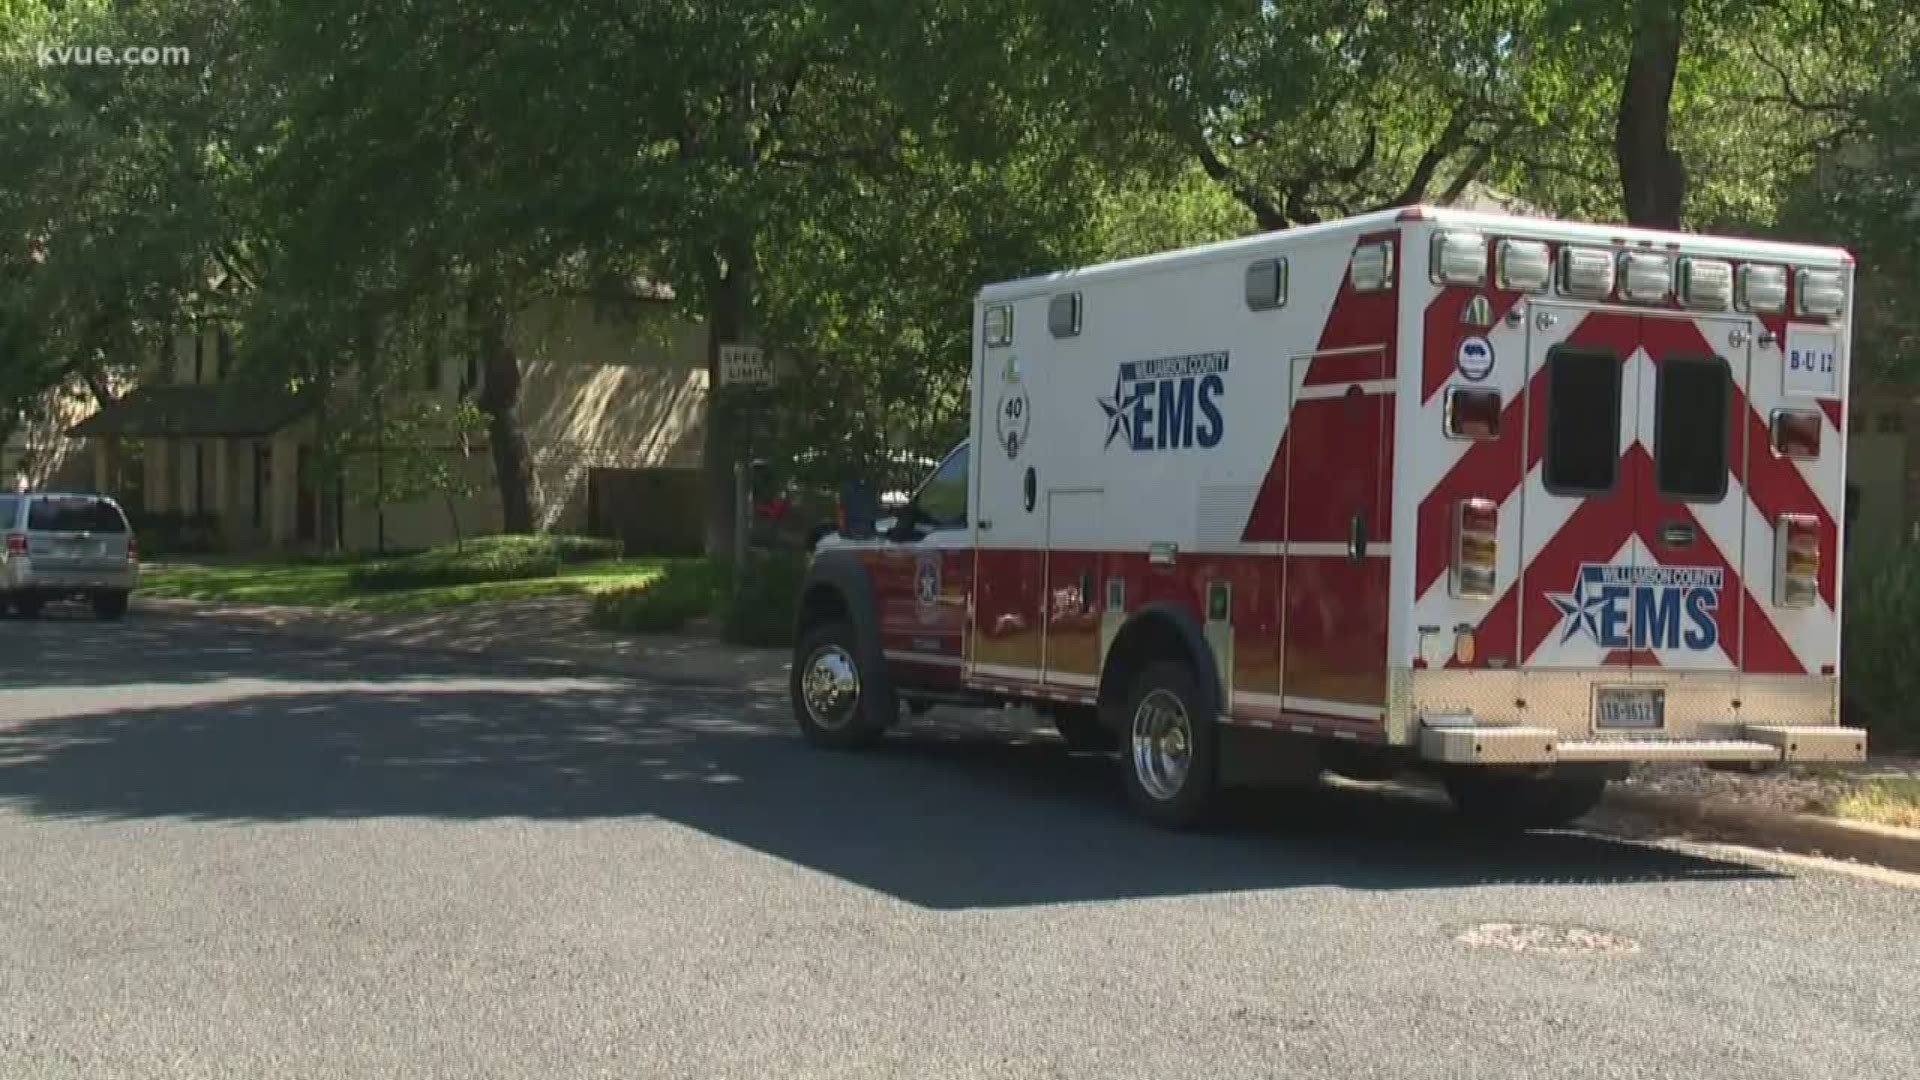 Texas Department of Family and Protective Services are now investigating the in-home daycare where a baby died Thursday morning, officials confirmed.